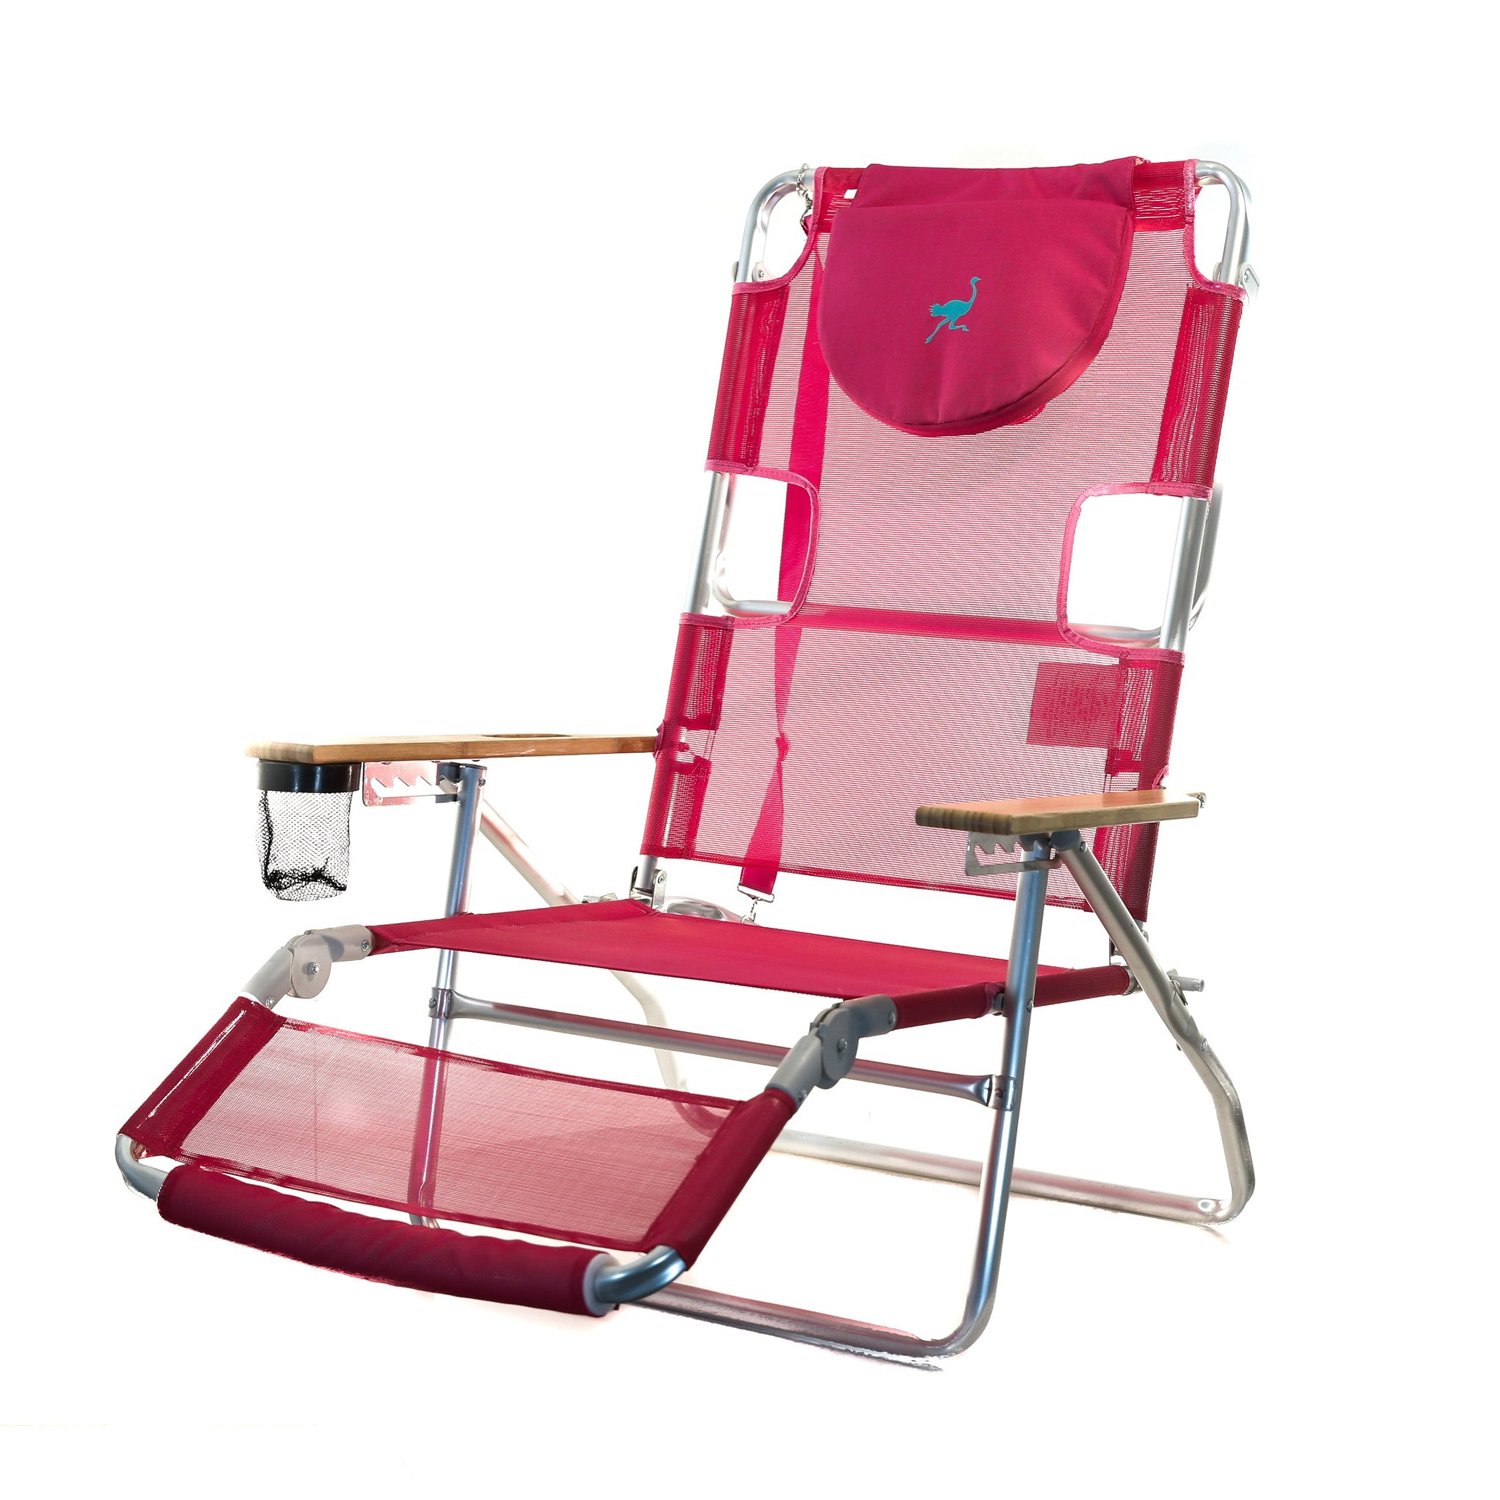 NO TAX Ostrich Lounge Chaise Lounger Beach Chair Camping Outdoor Folding PINK